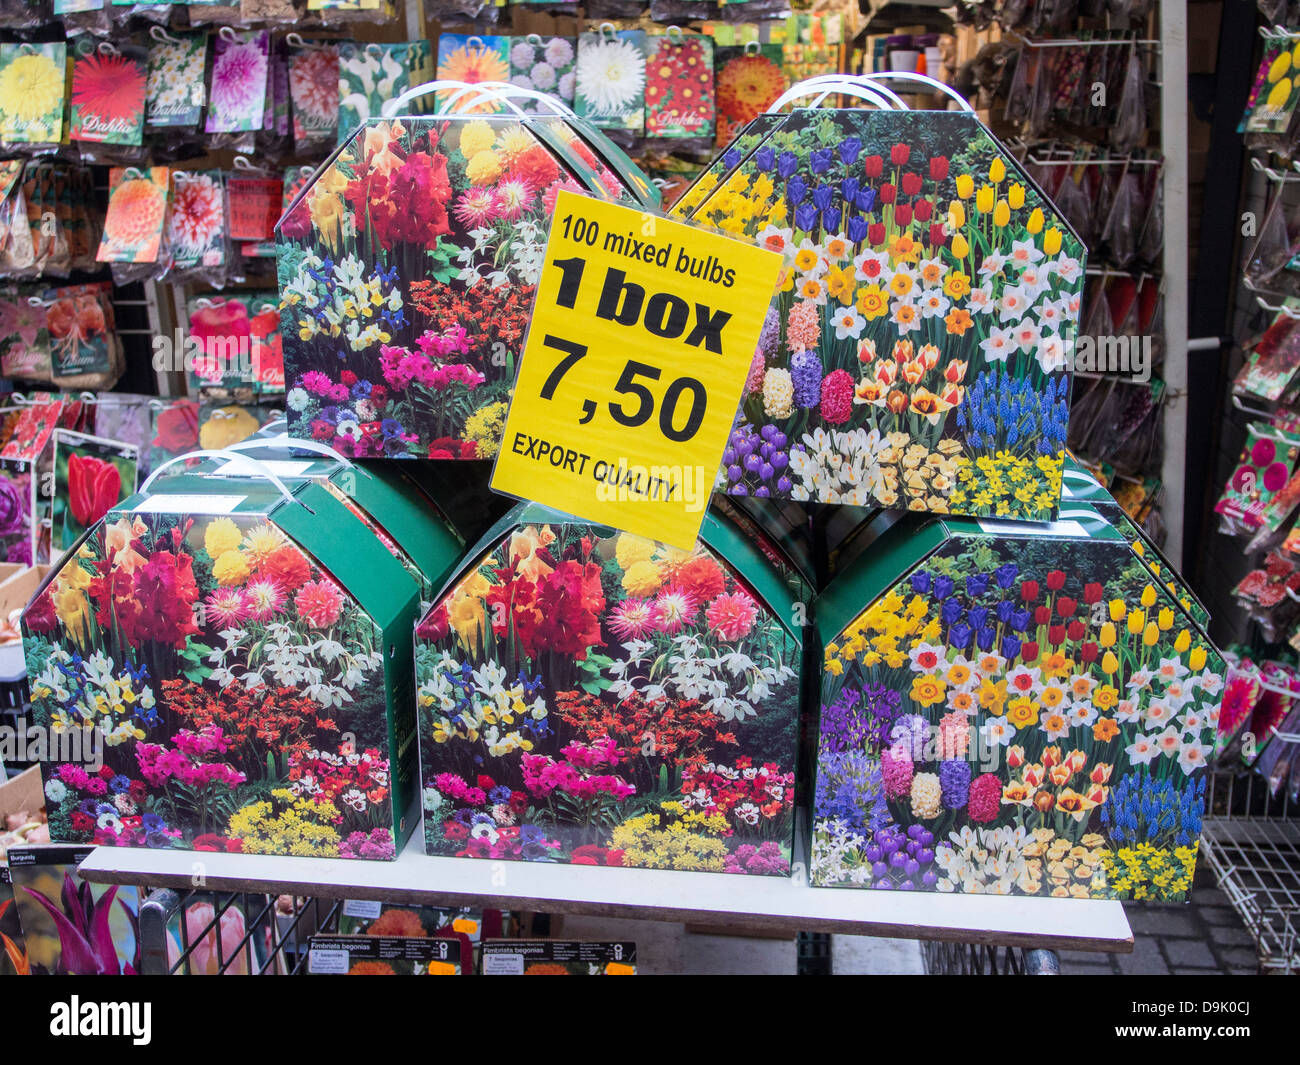 Tulip bulbs for sale at a market in Amsterdam, Netherlands Stock Photo -  Alamy